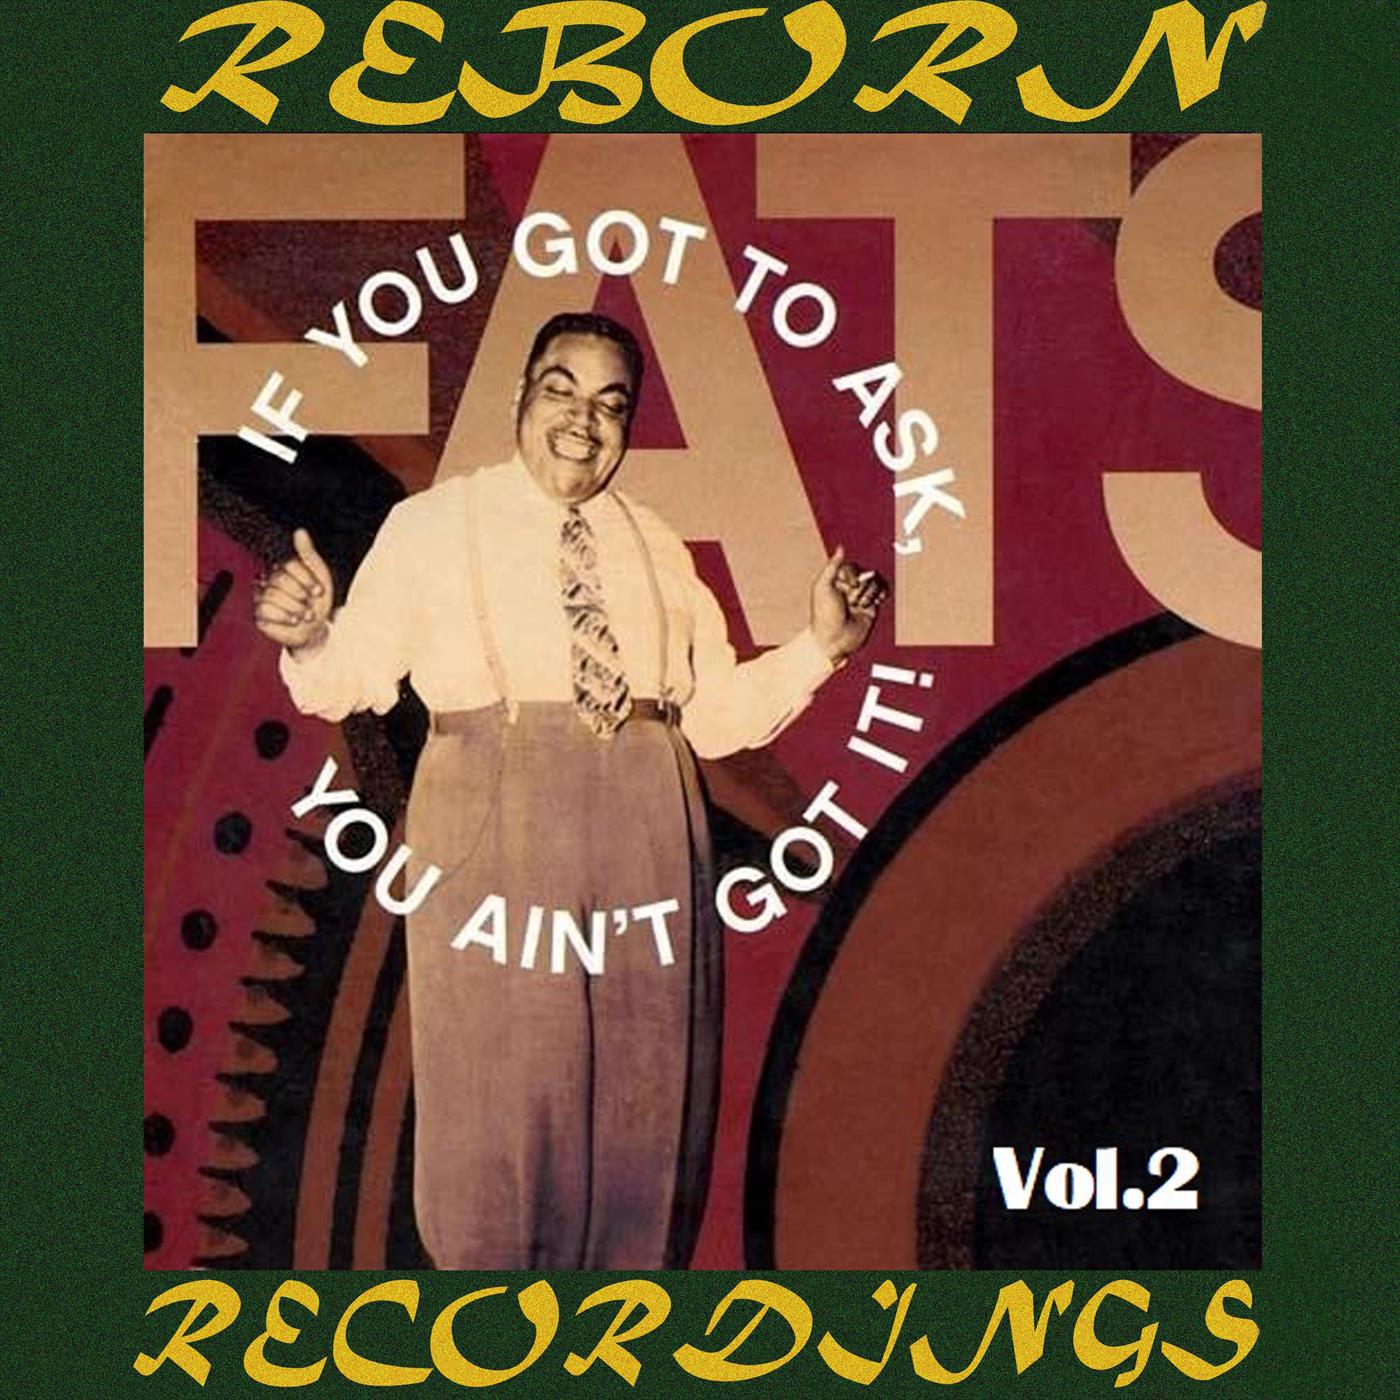 If You Got to Ask, You Ain't Got It, Vol.2 (HD Remastered)